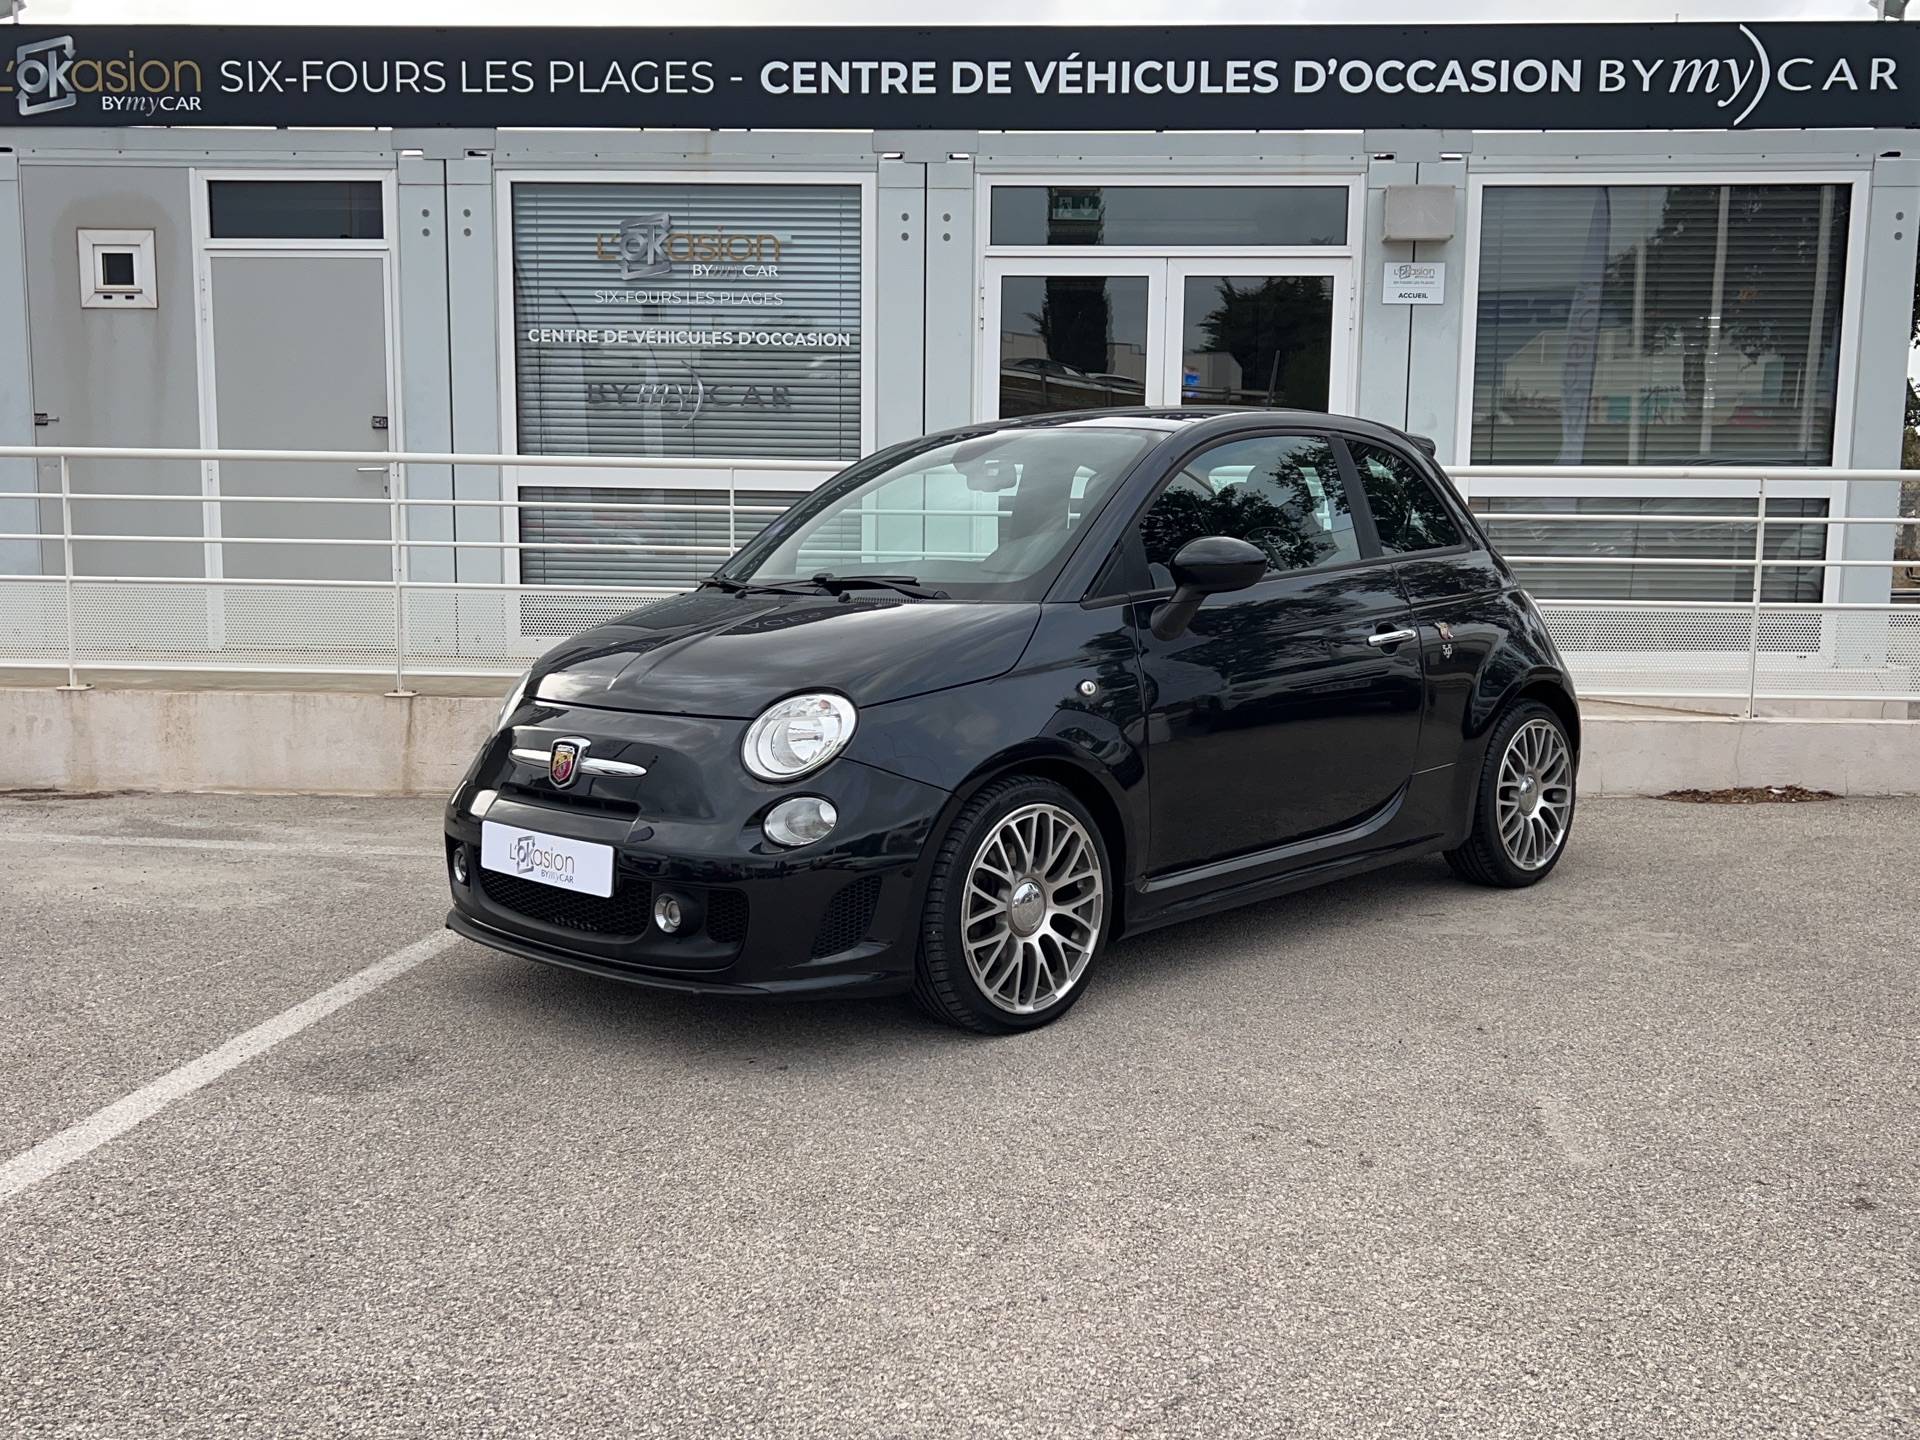 https://feassets.bymycar.fr/vo/122/246690/0/abarth-595-14-turbo-16v-t-jet-140-ch-occasion-2016-six-fours-les-plages.jpg